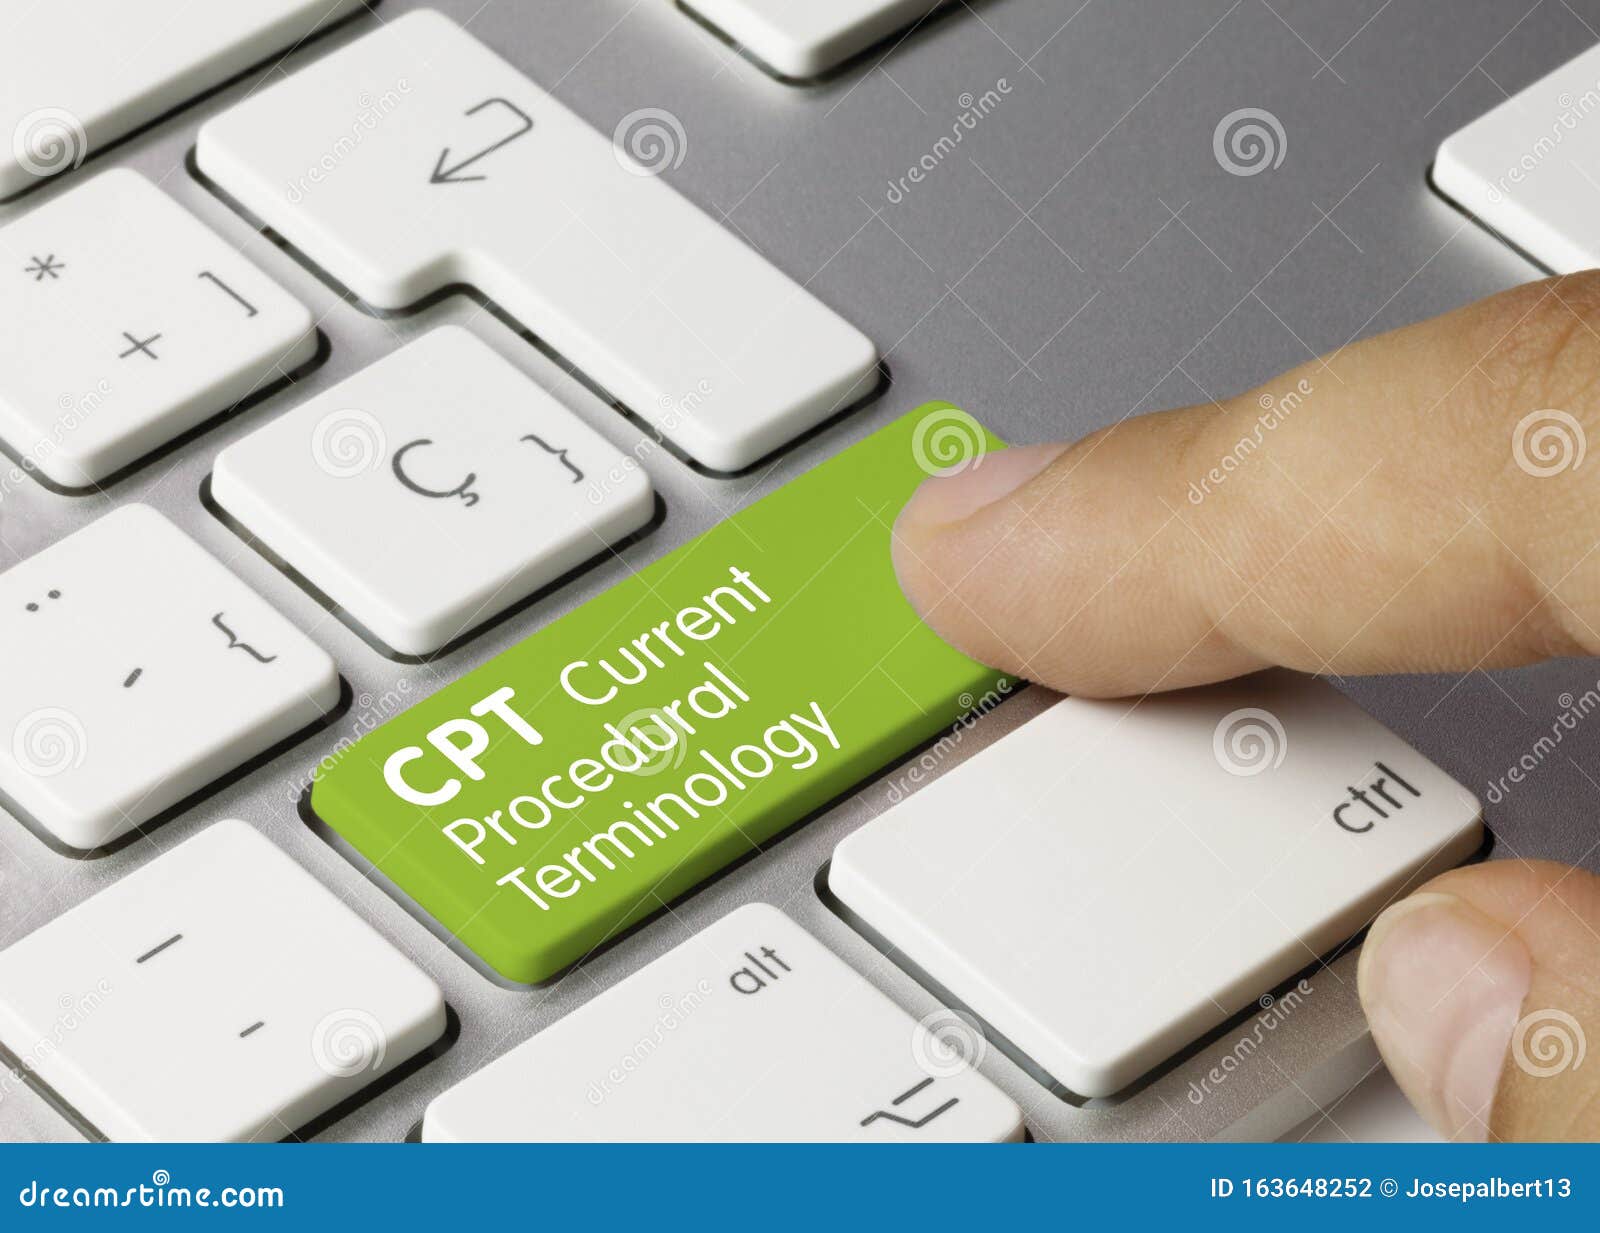 cpt current procedural terminology - inscription on green keyboard key